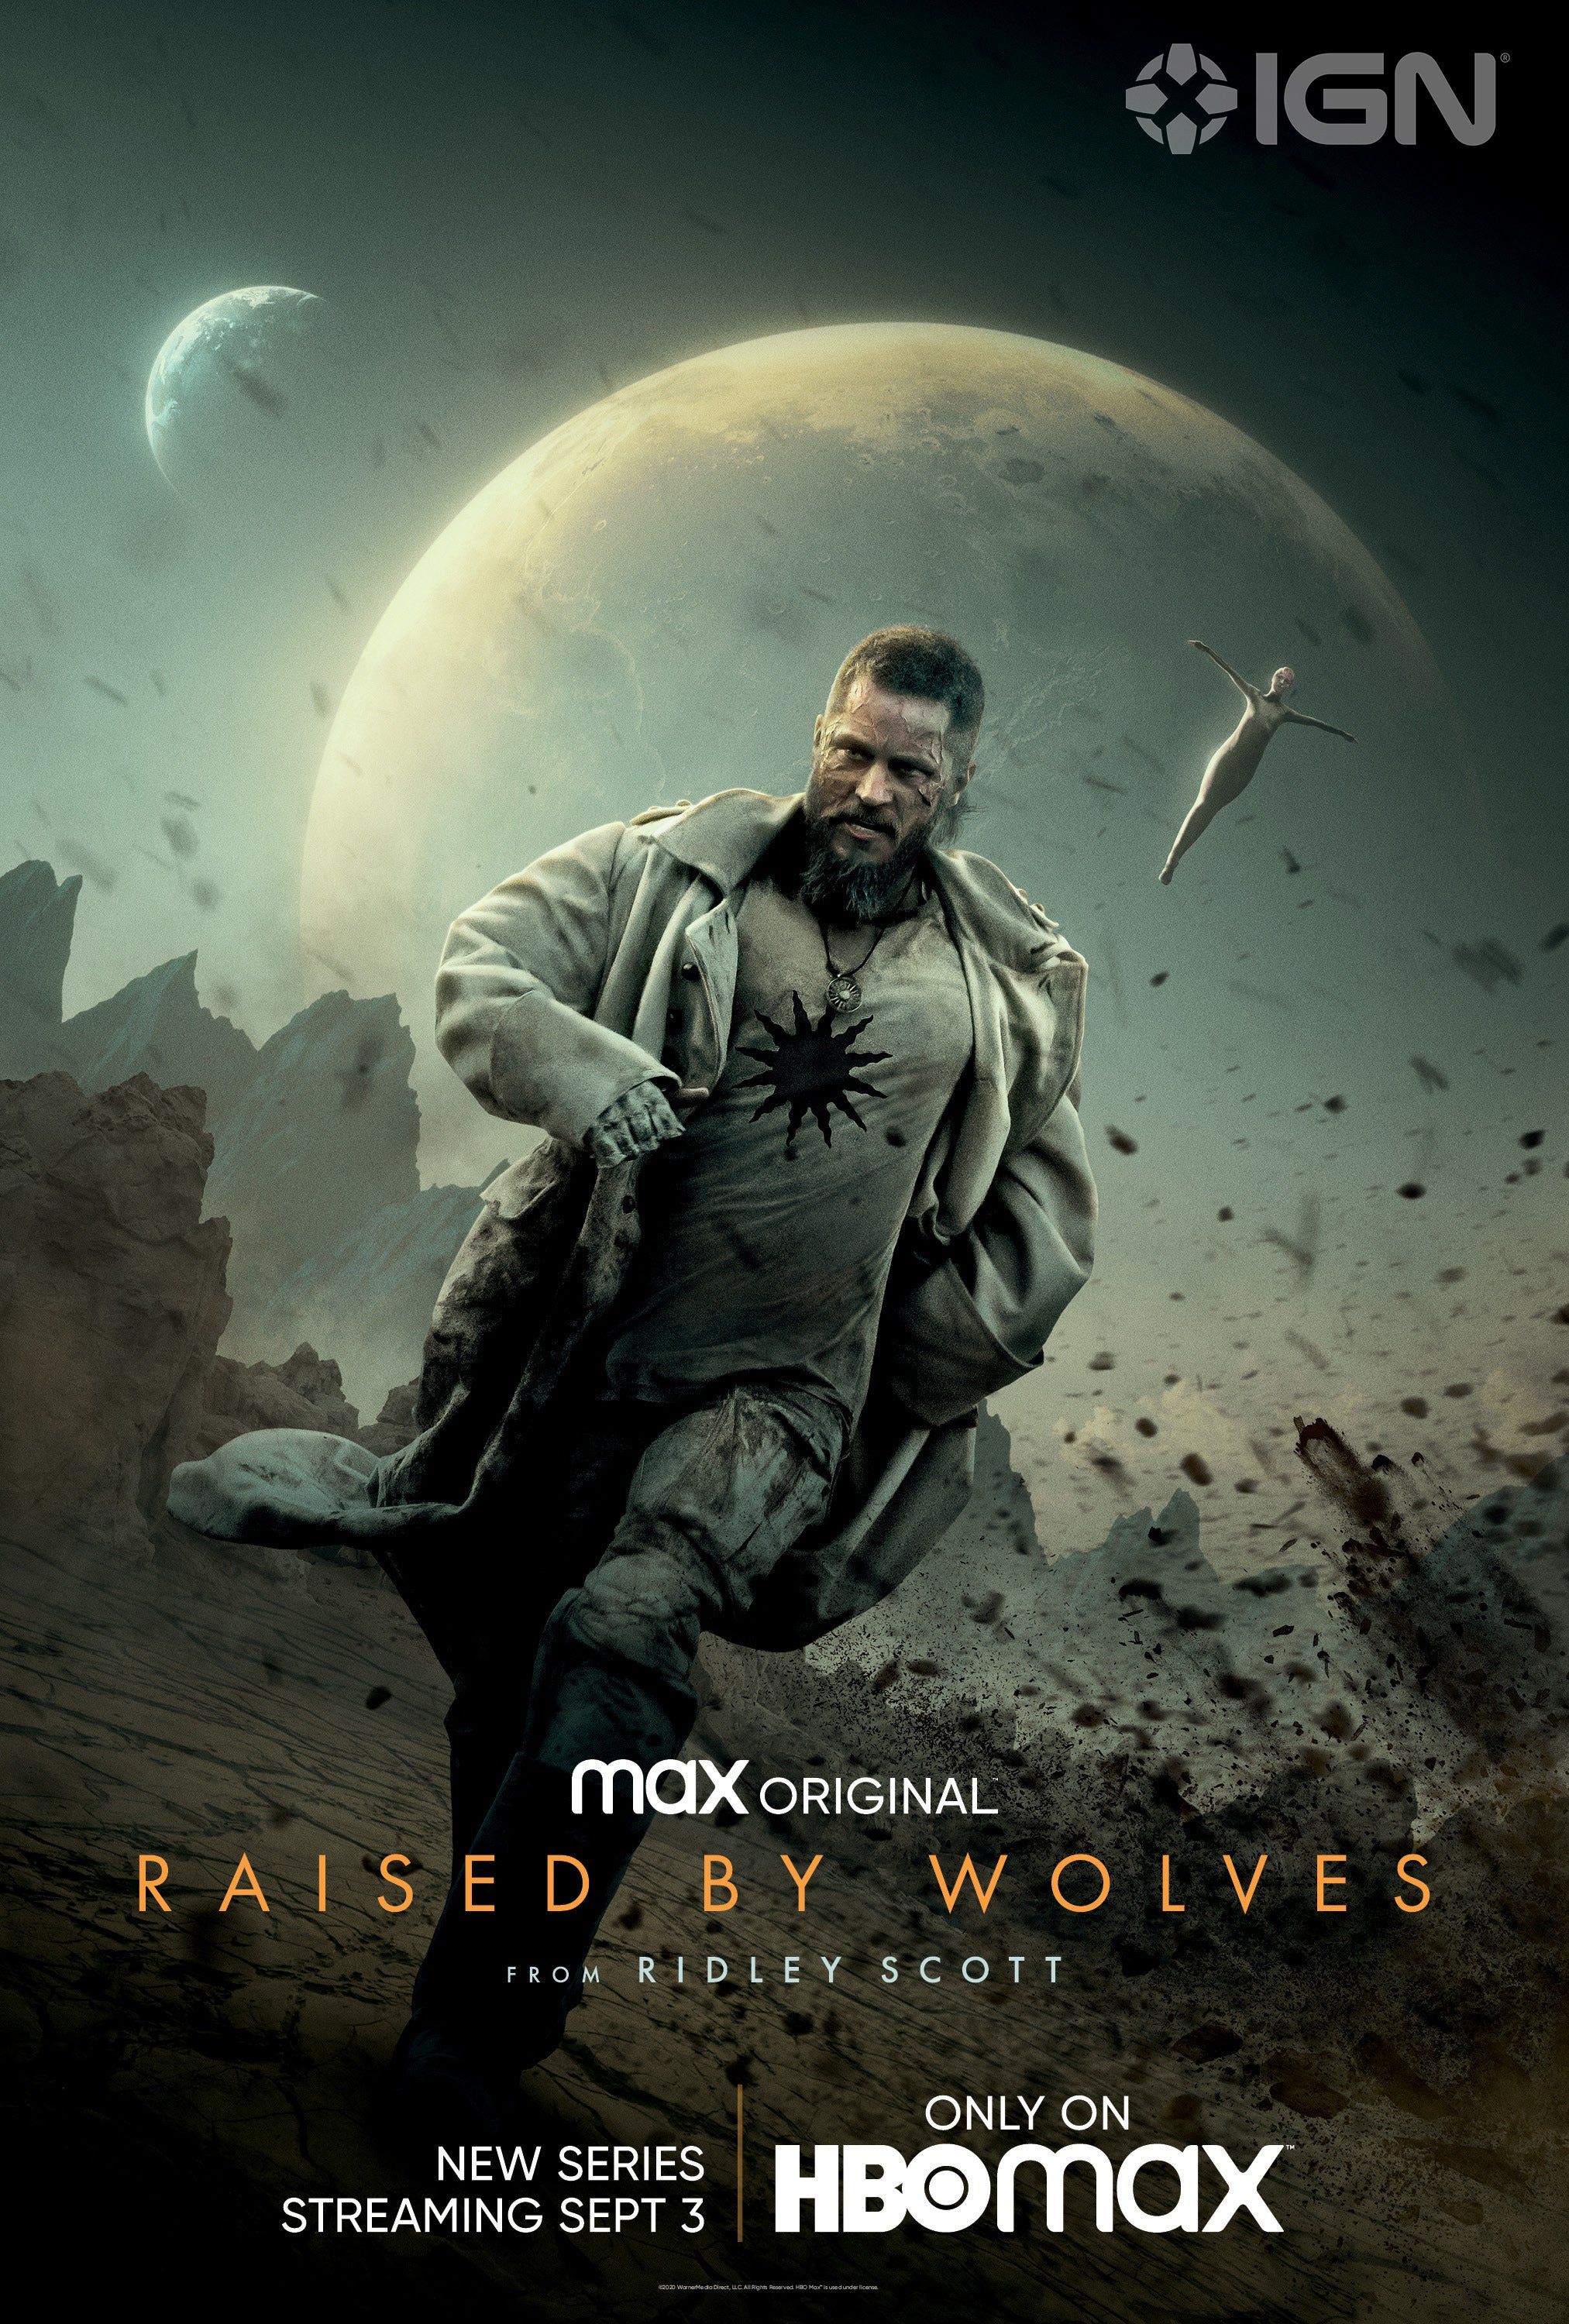 Travis Fimmel Raised By Wolves Wallpapers